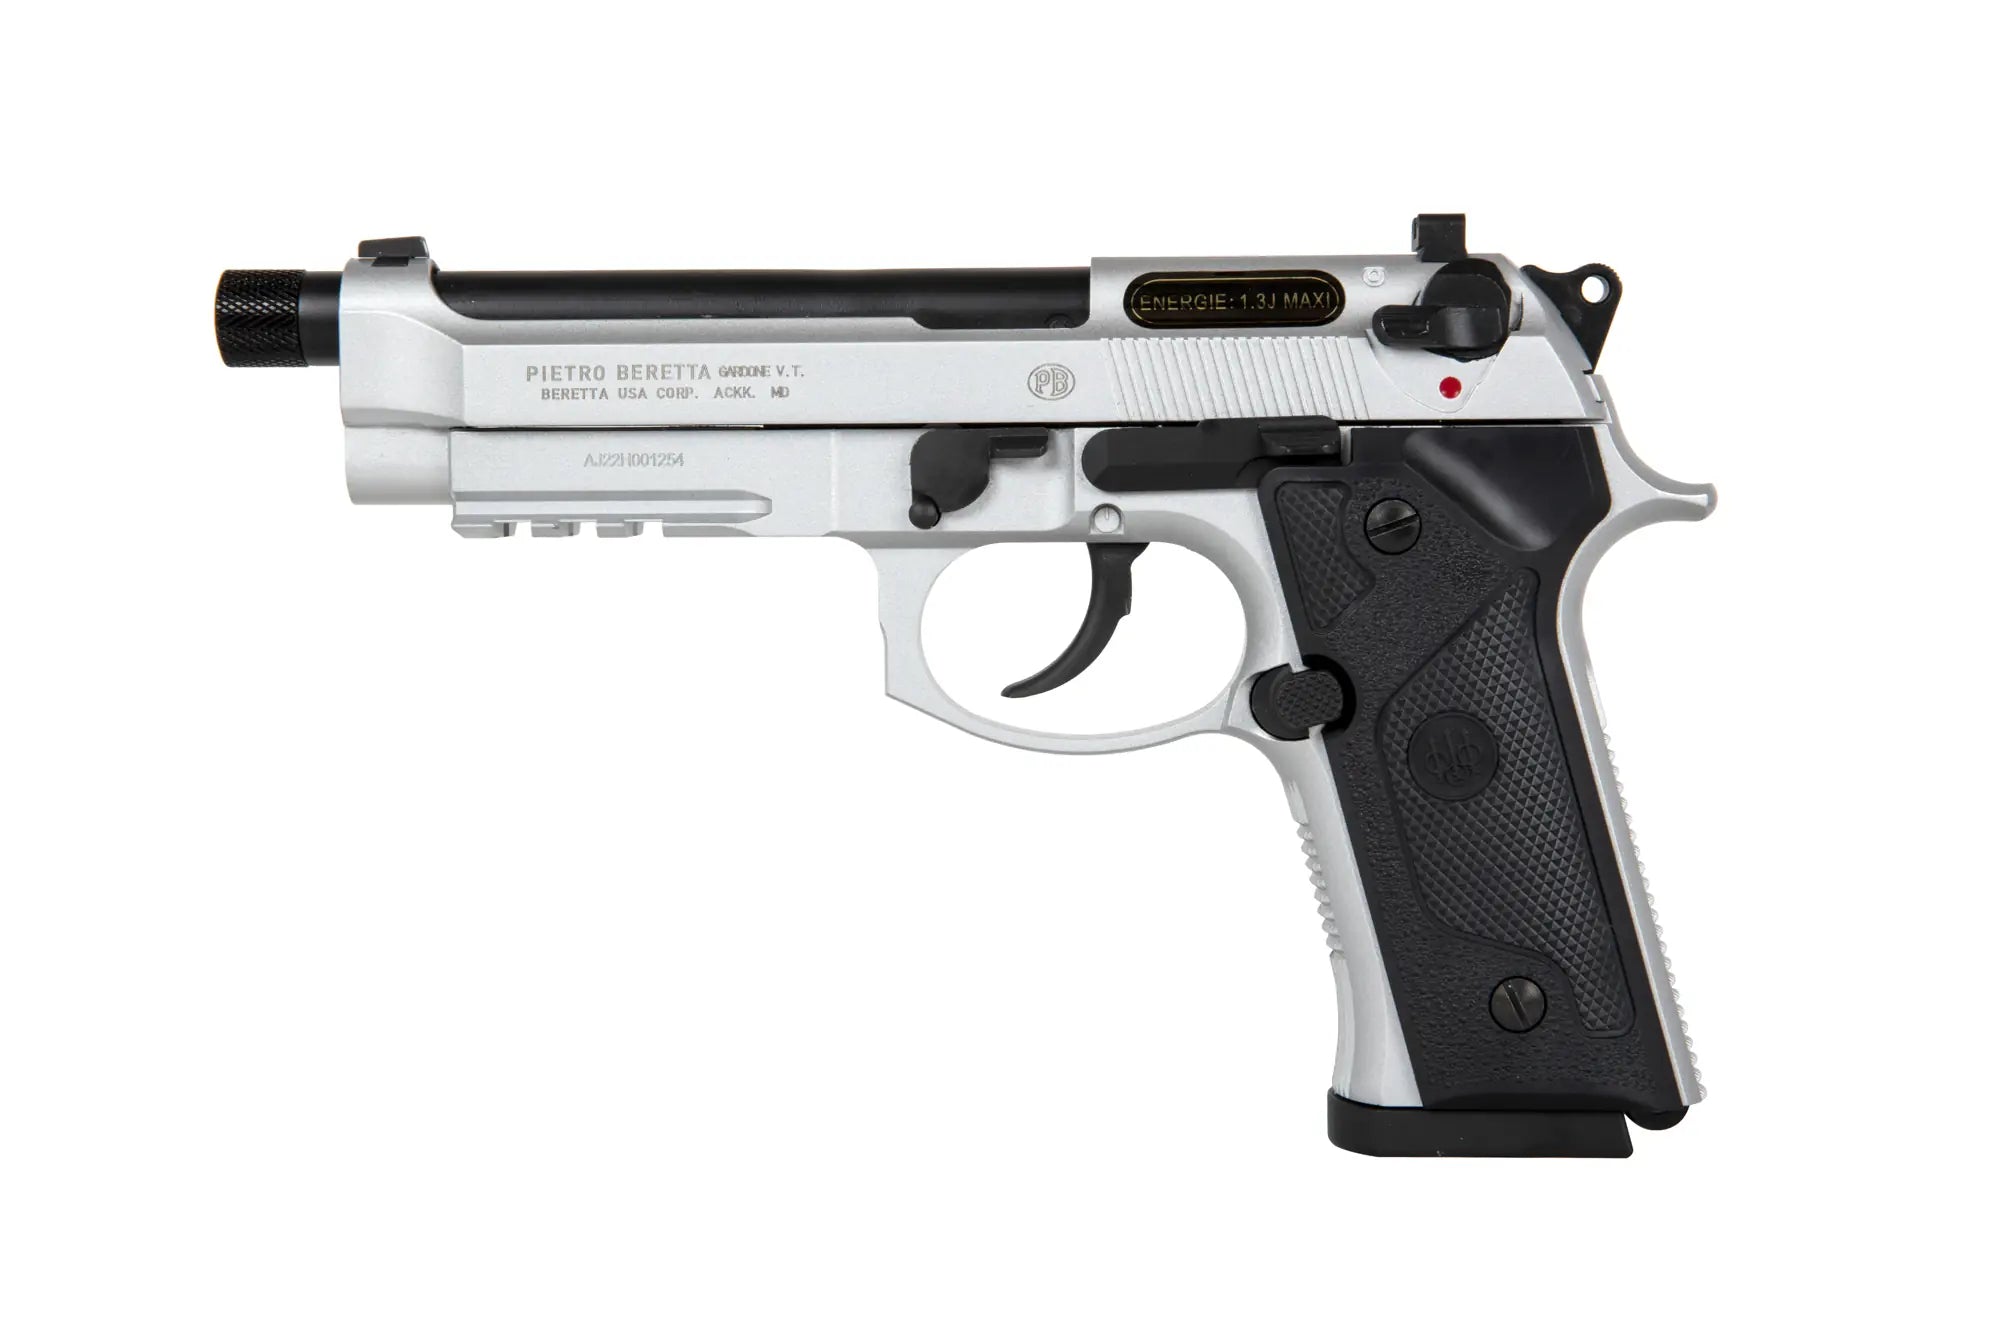 Beretta M9A3 FM Licensed CO2-Powered UMAREX Airsoft Pistol with Realistic Recoil.